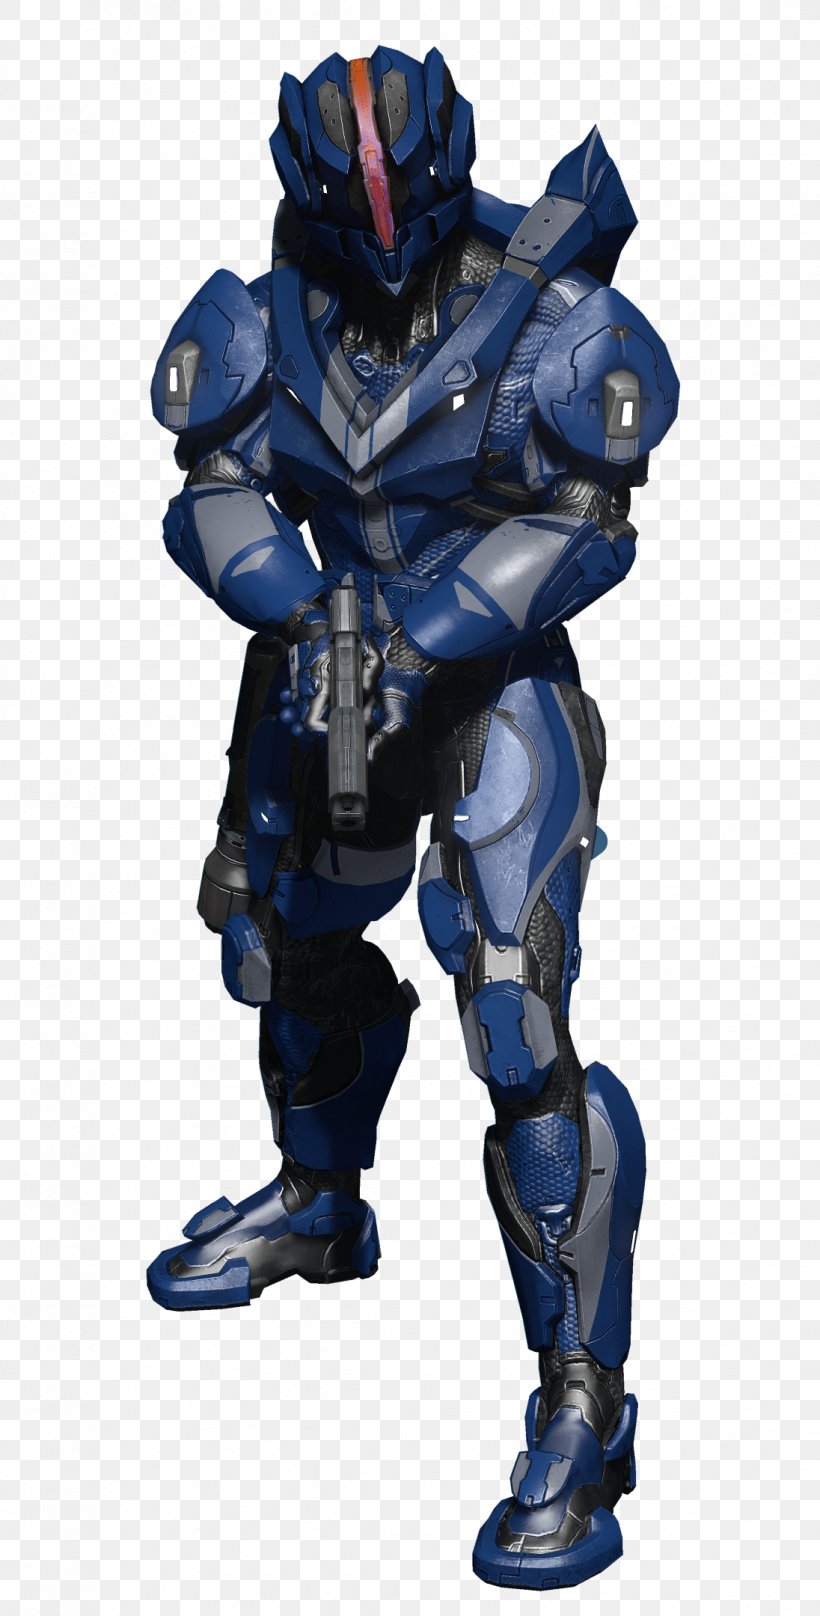 Halo 4 Halo: Reach Halo 5: Guardians Halo 3 Master Chief, PNG, 1096x2160px, 343 Industries, Halo 4, Action Figure, Armour, Cortana Download Free